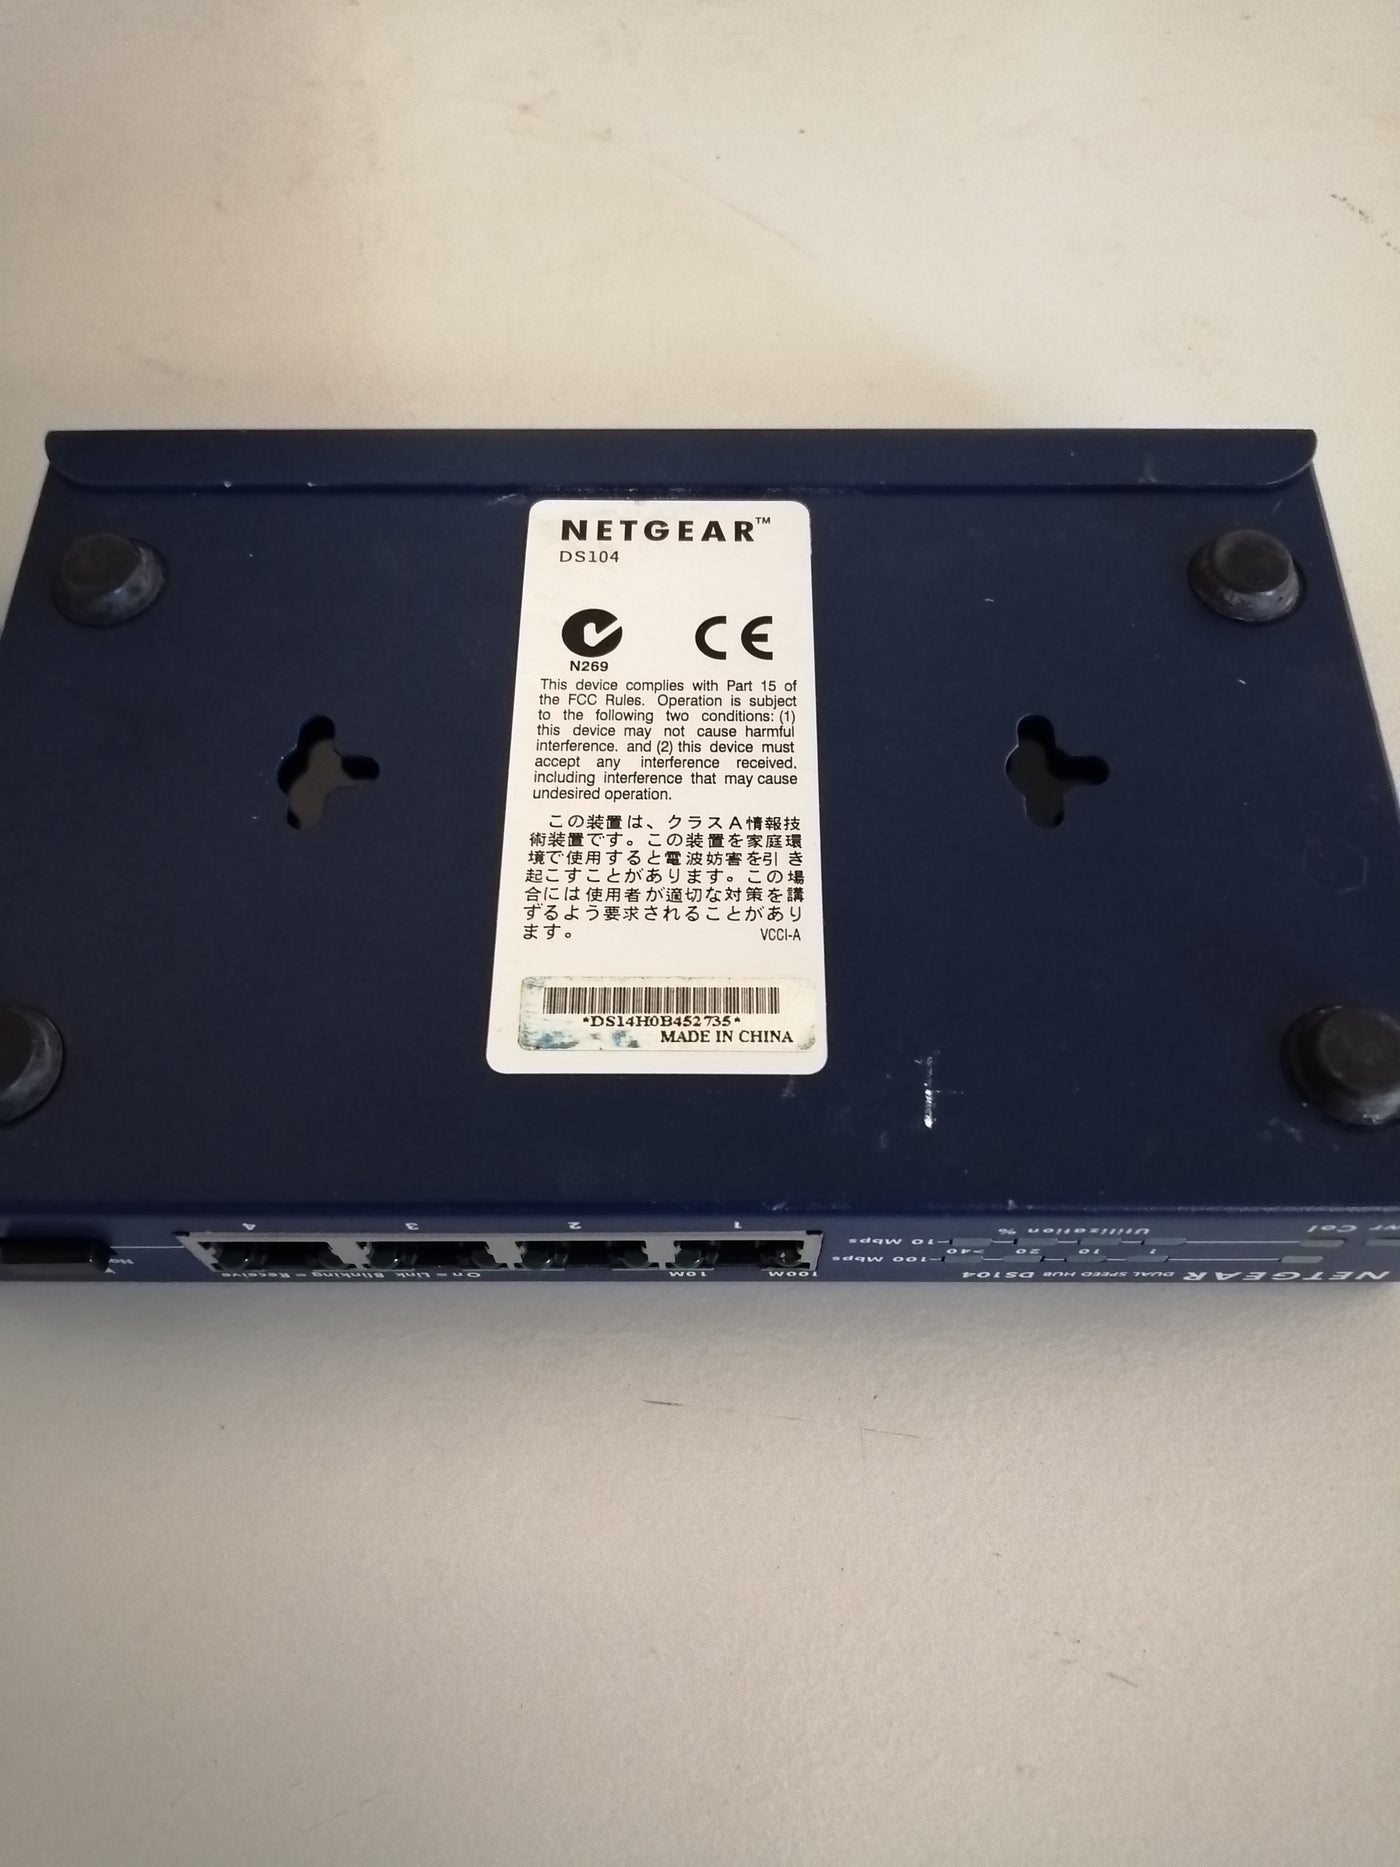 Netgear 4 Port 10/100Mbps Dual Speed Hub DS104 ( DS104 DS104  used, no psu )